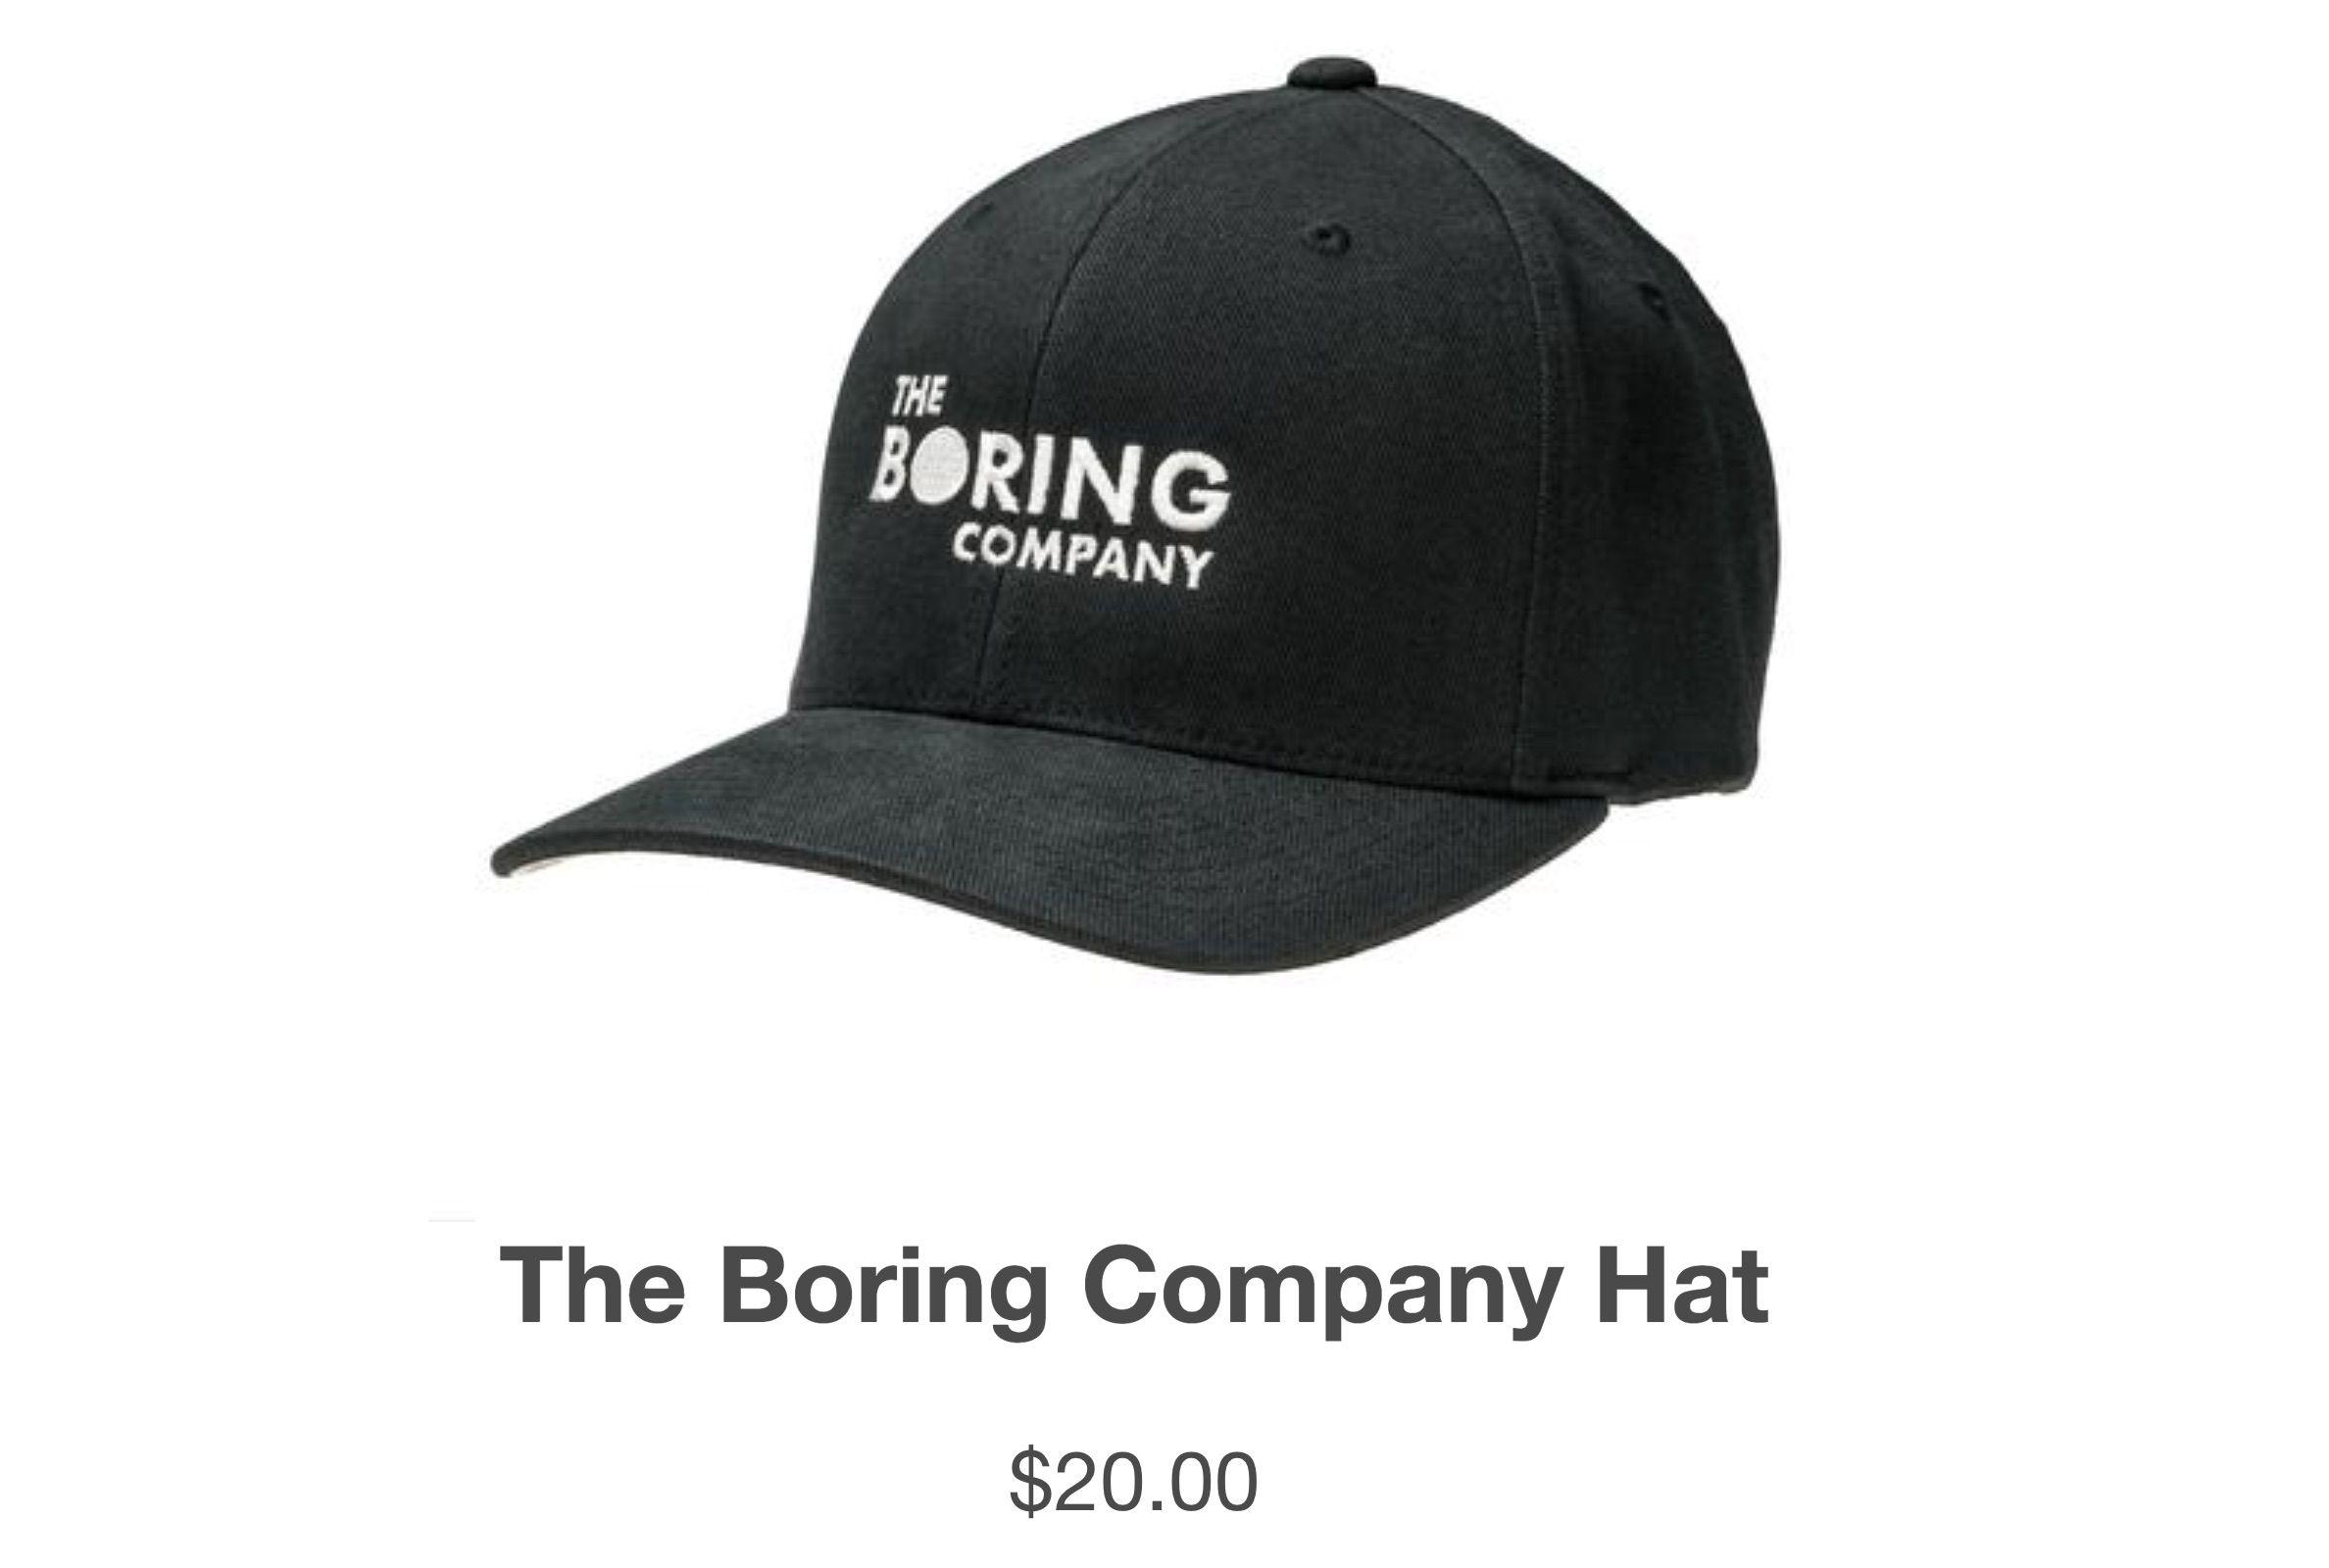 The Boring Company Logo - Elon Musk sold $80k worth of The Boring Company hats in under 24 hours